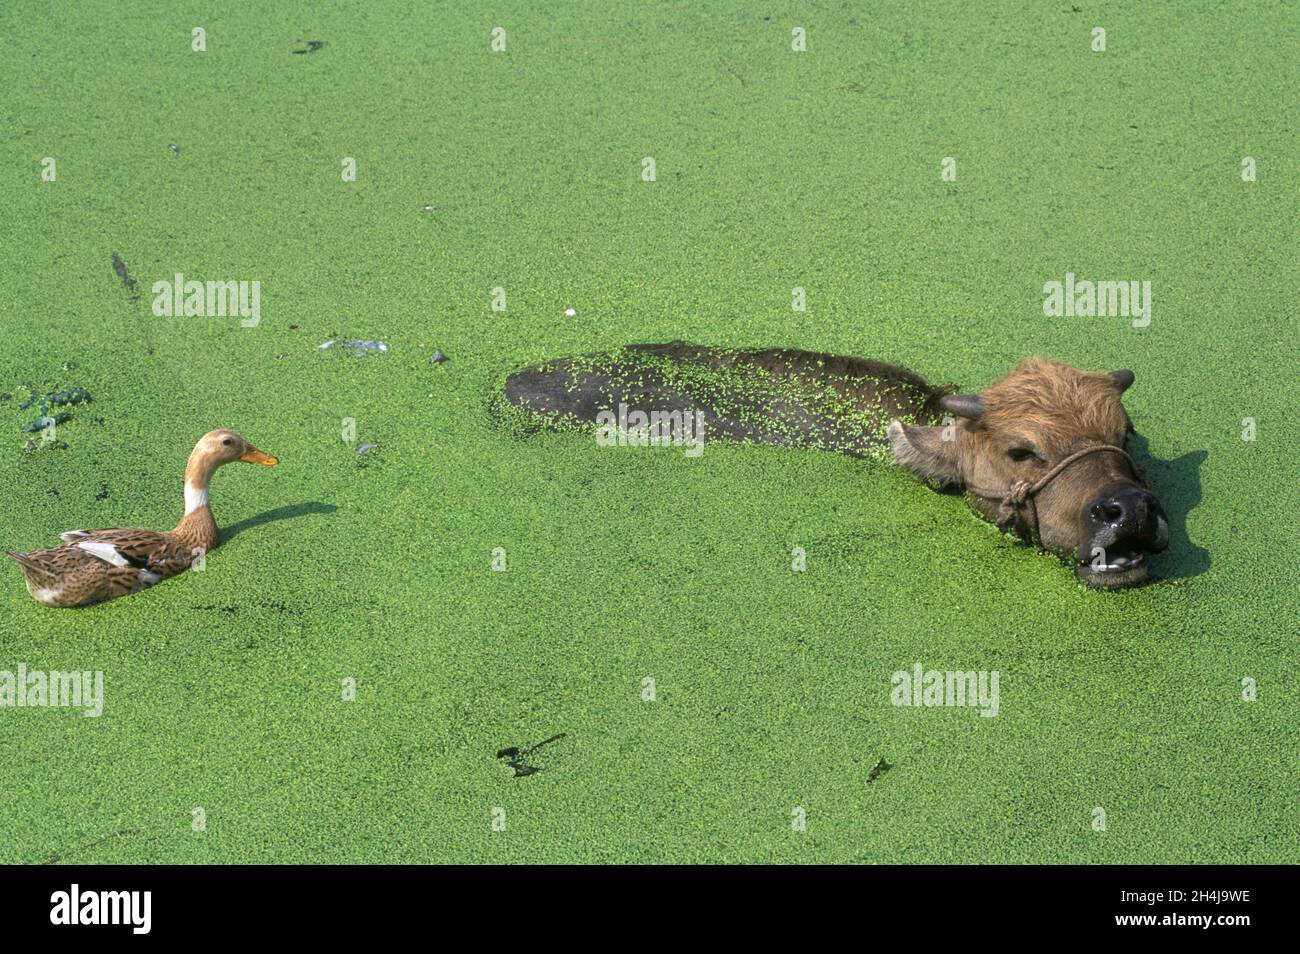 Yiwu, Zhejiang Province, China, 2001, 2000s.   A water buffalo swims through duckweed watched by a duck that has come to see what is going on. Traditional farming takes place in this prosperous province HOMER SYKES Stock Photo